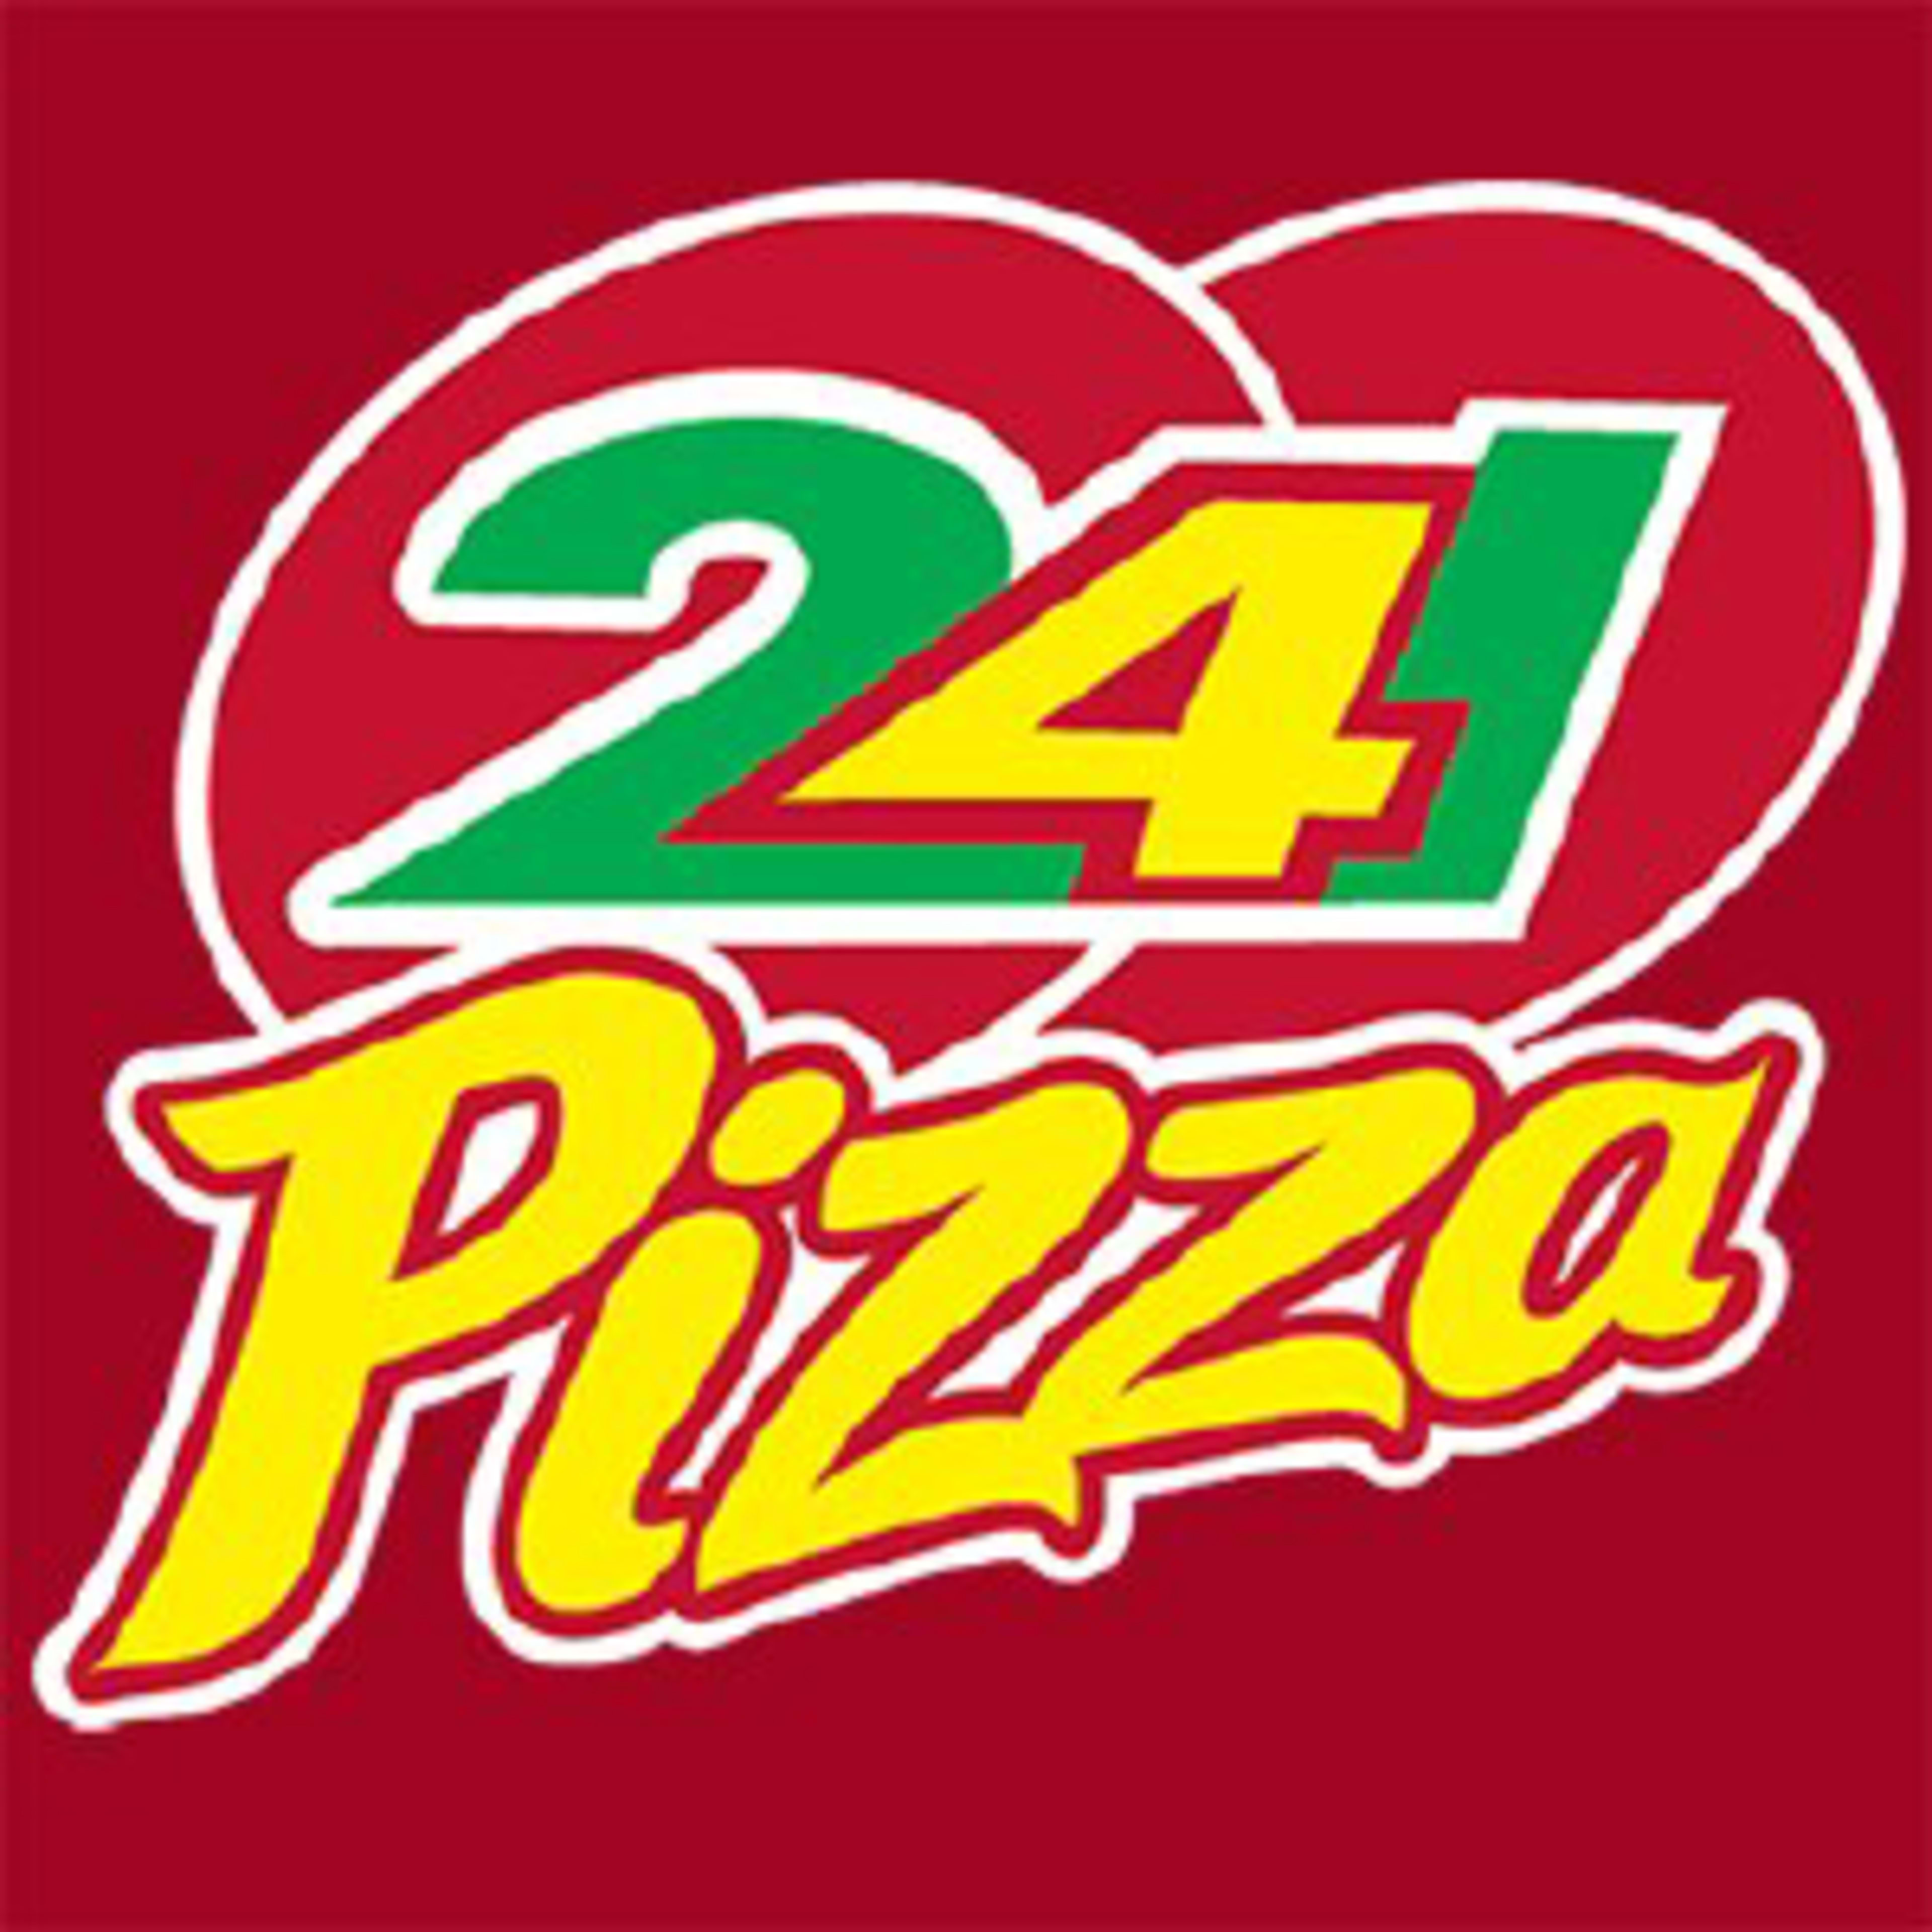 241 PizzaCode